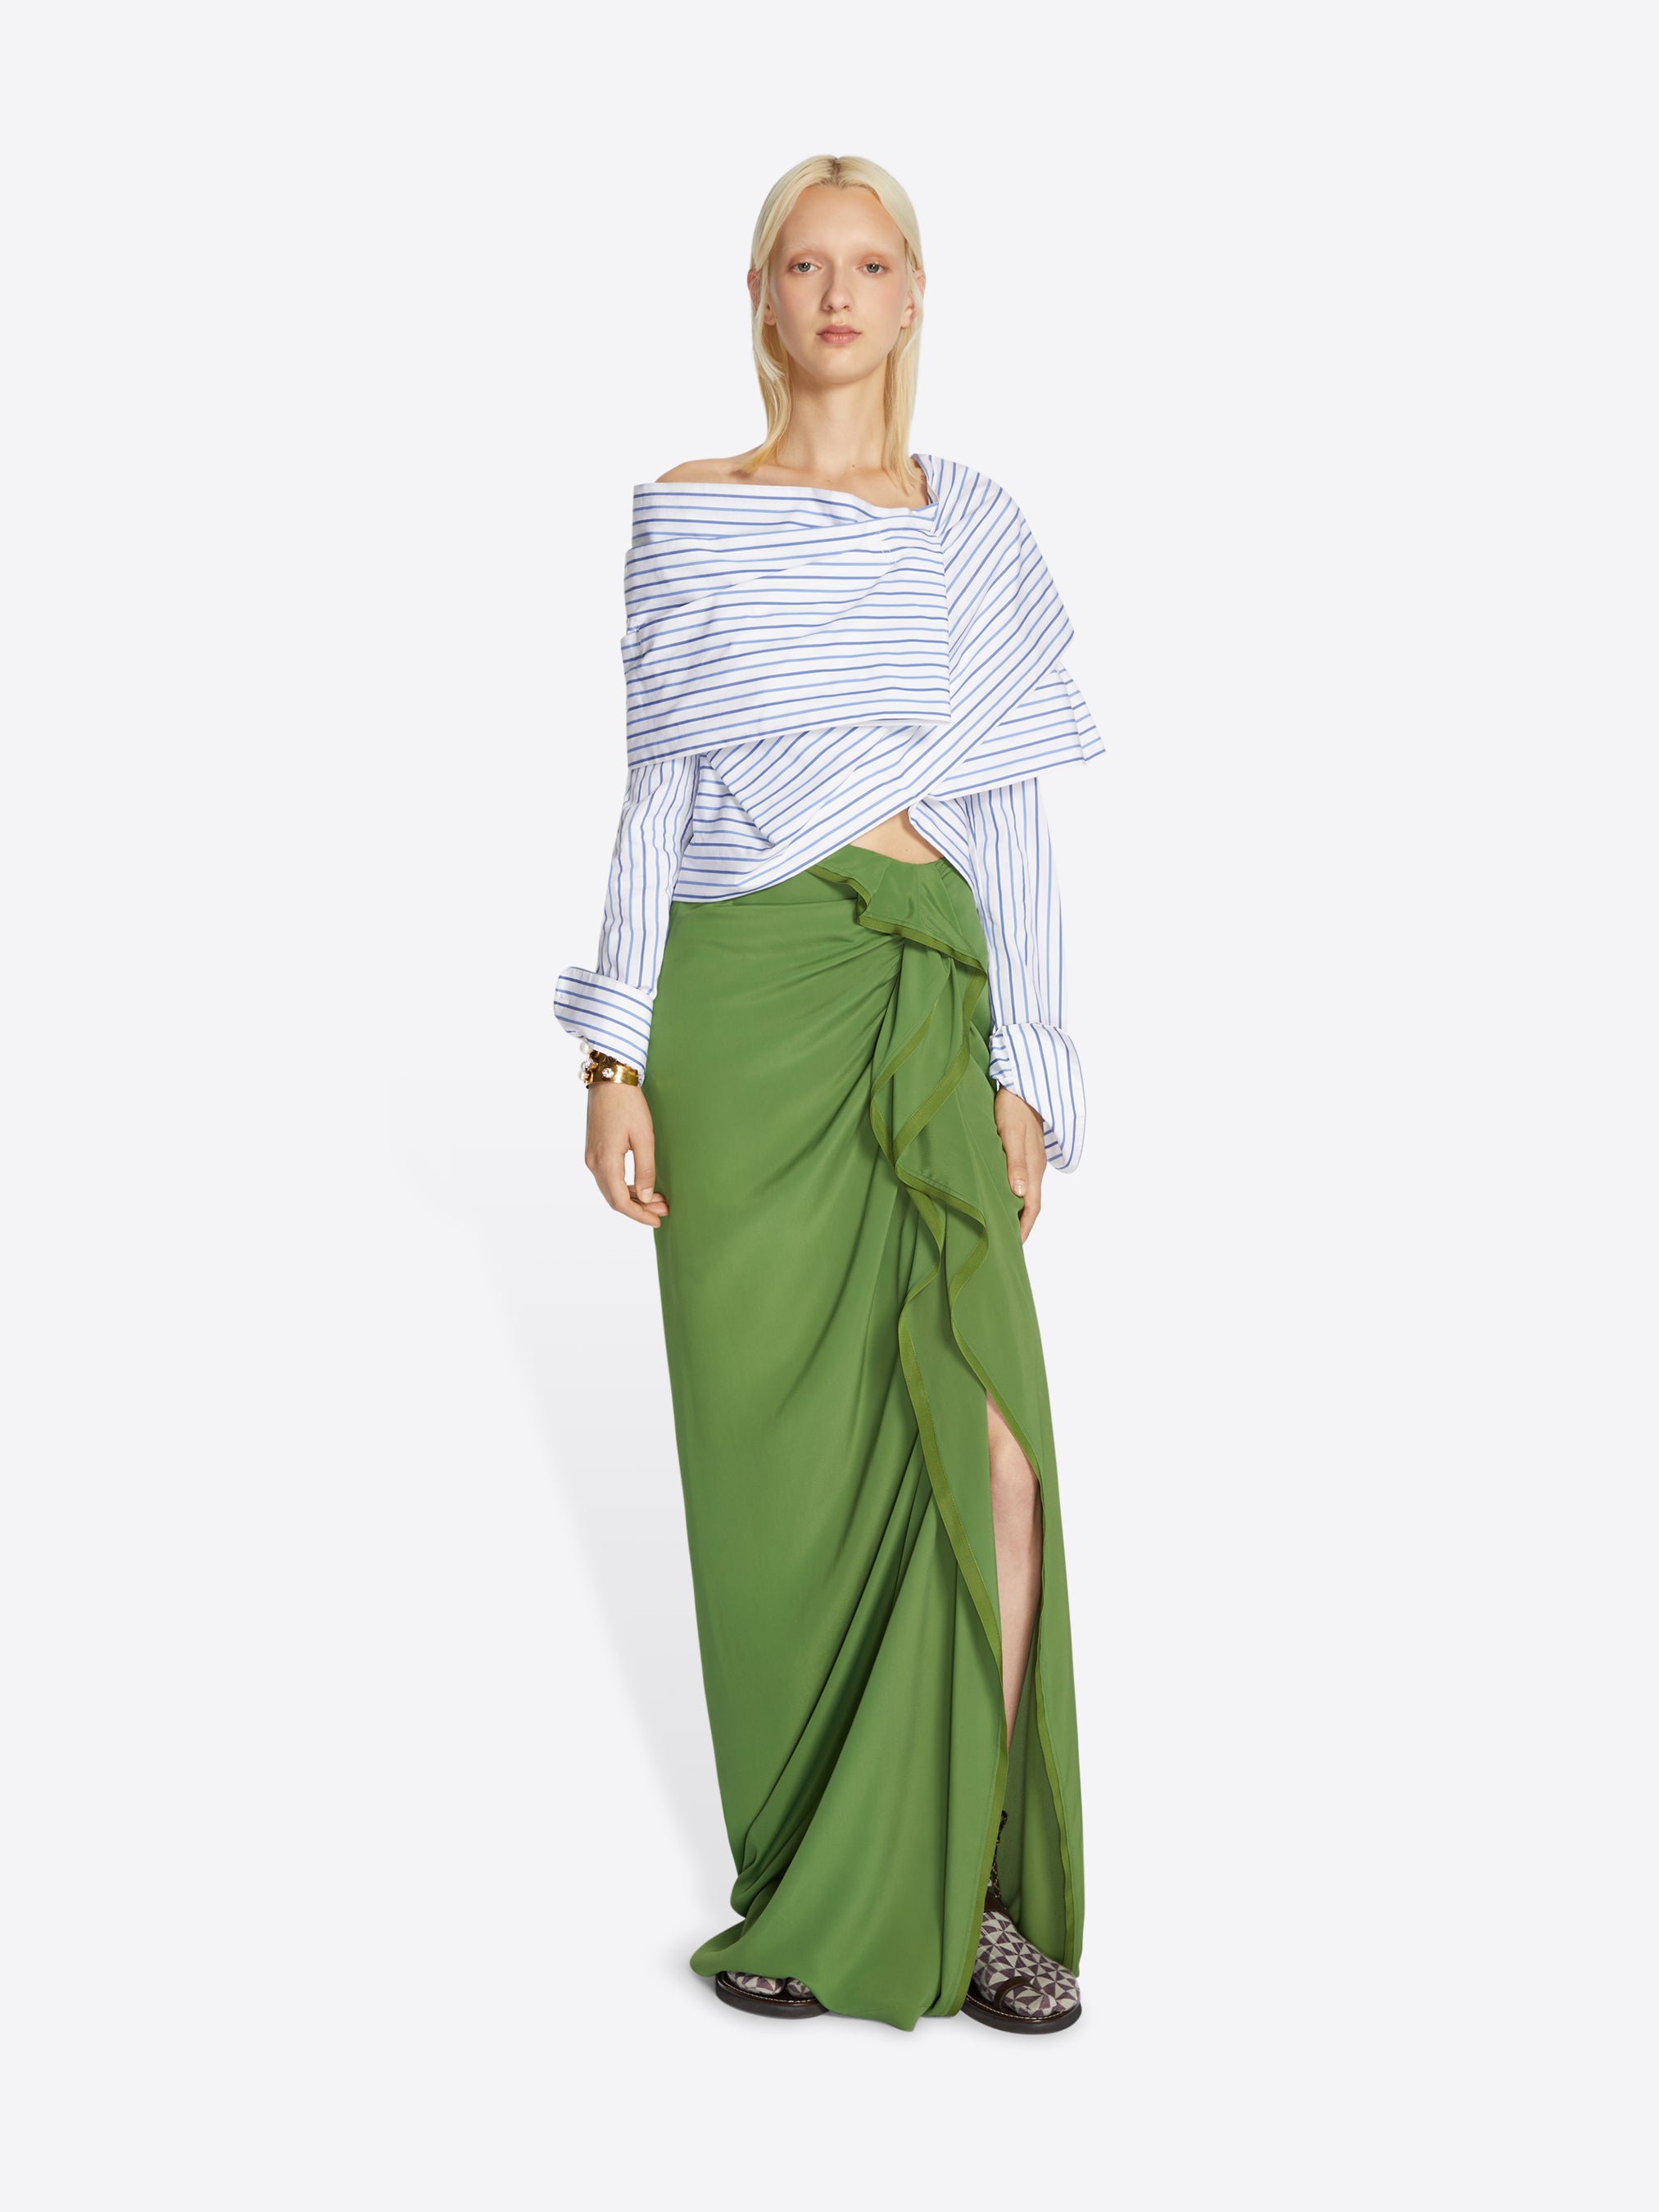 Knotted Top and Draped Skirt – FUELTHESTORE